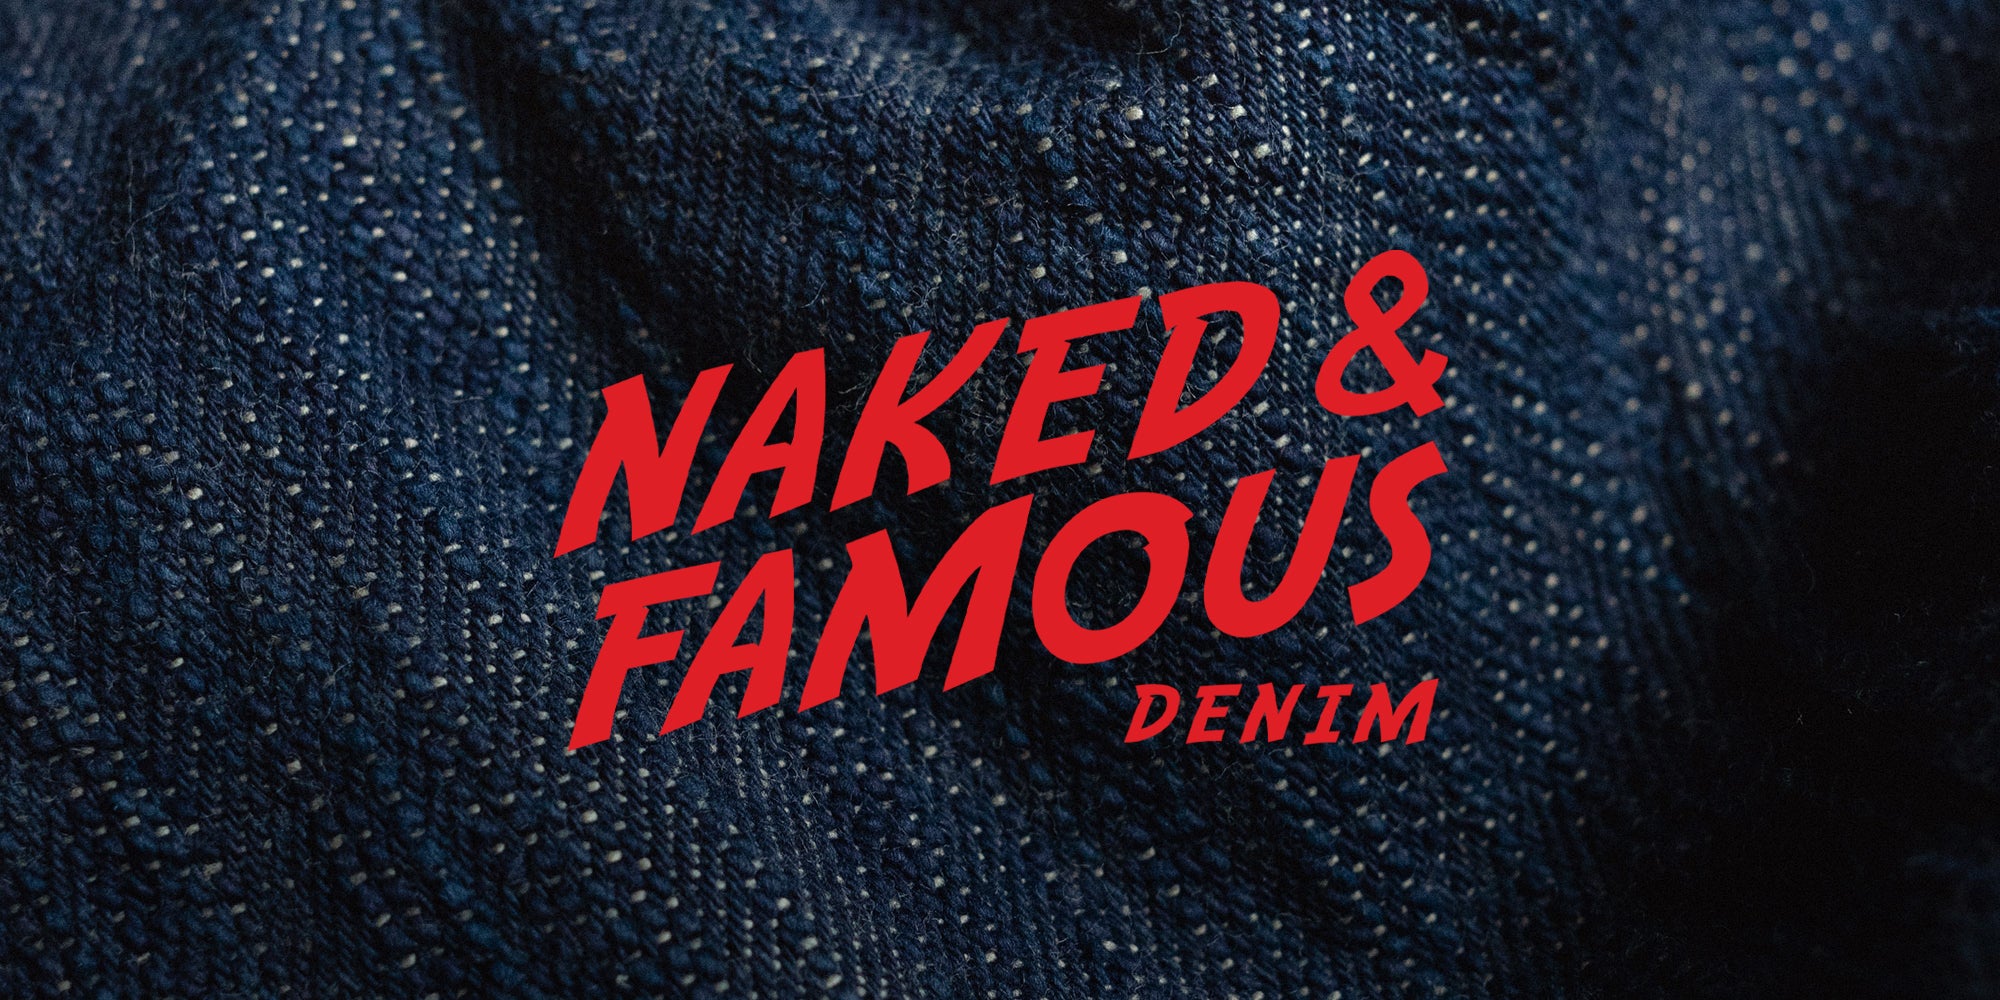 Naked & Famous